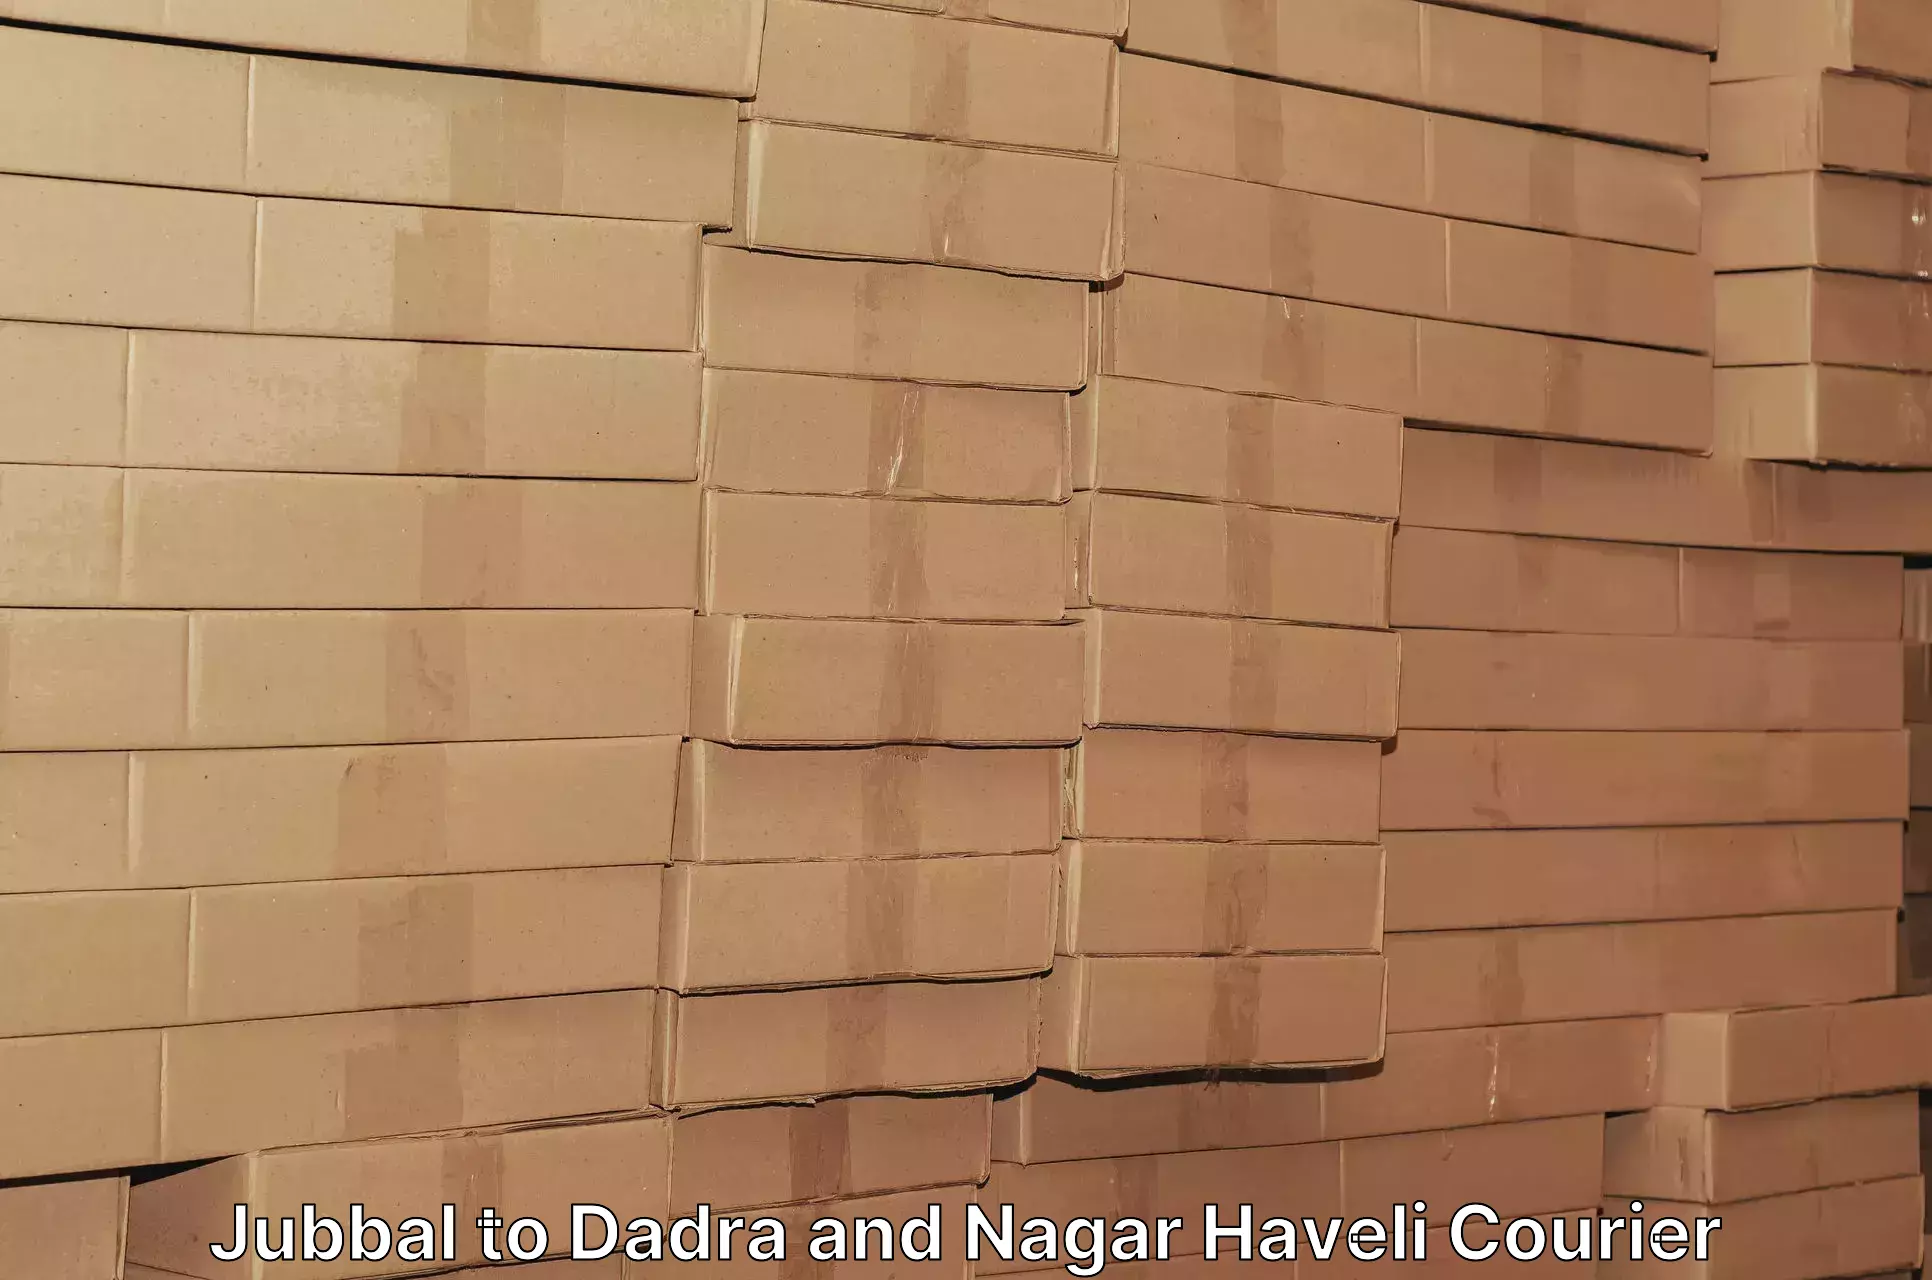 Reliable courier services Jubbal to Dadra and Nagar Haveli